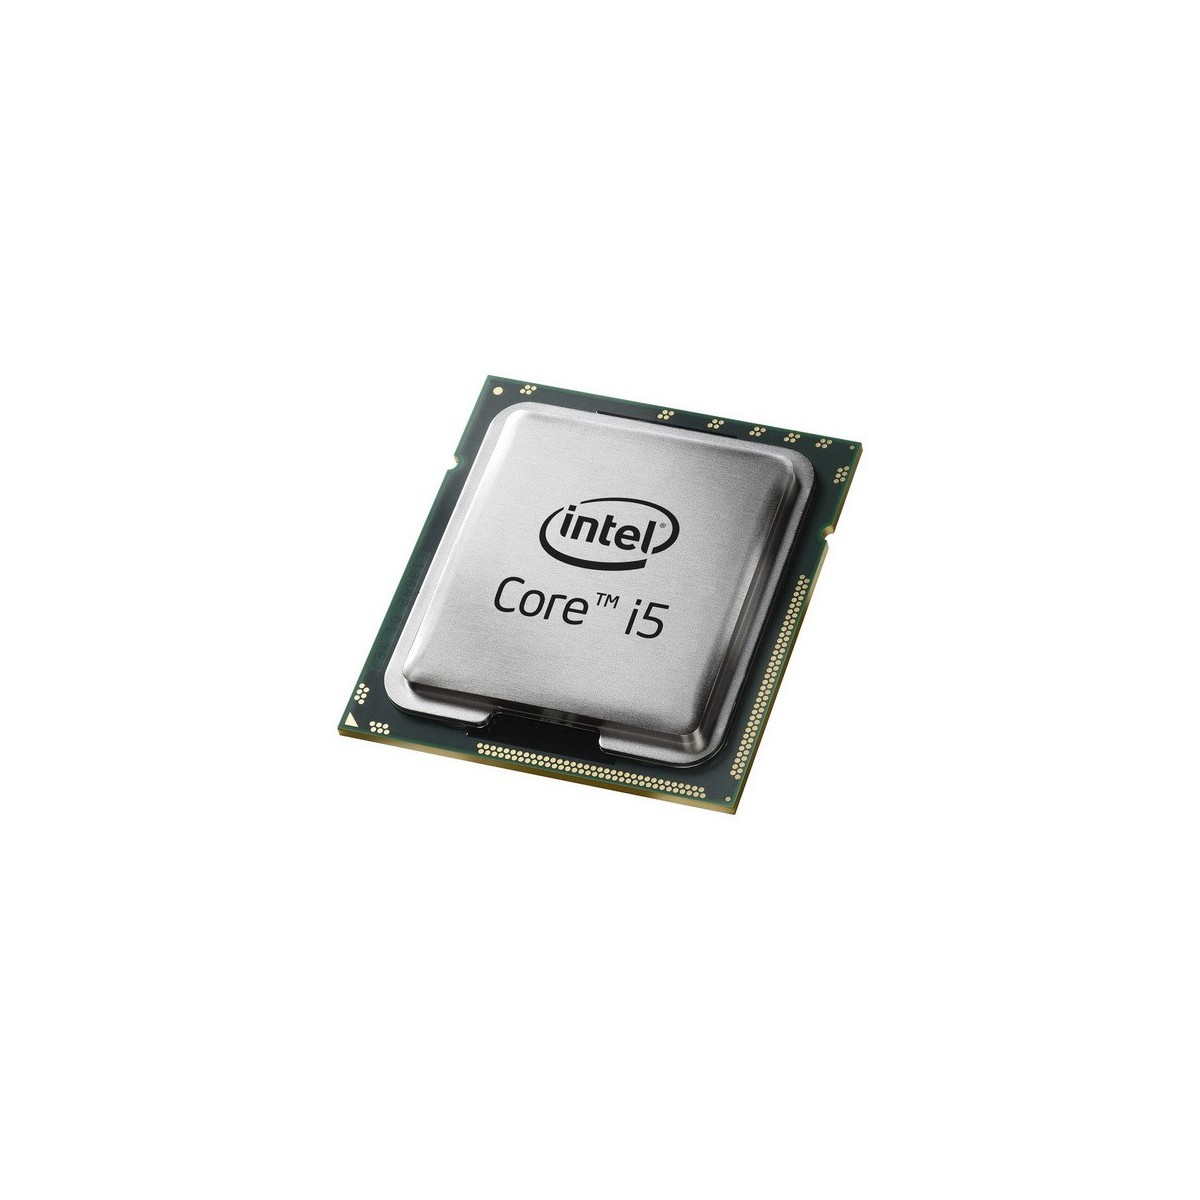 Intel Core i5-4590 Core i5 2 GHz - Skt 1150 Haswell 22 nm - 35 W